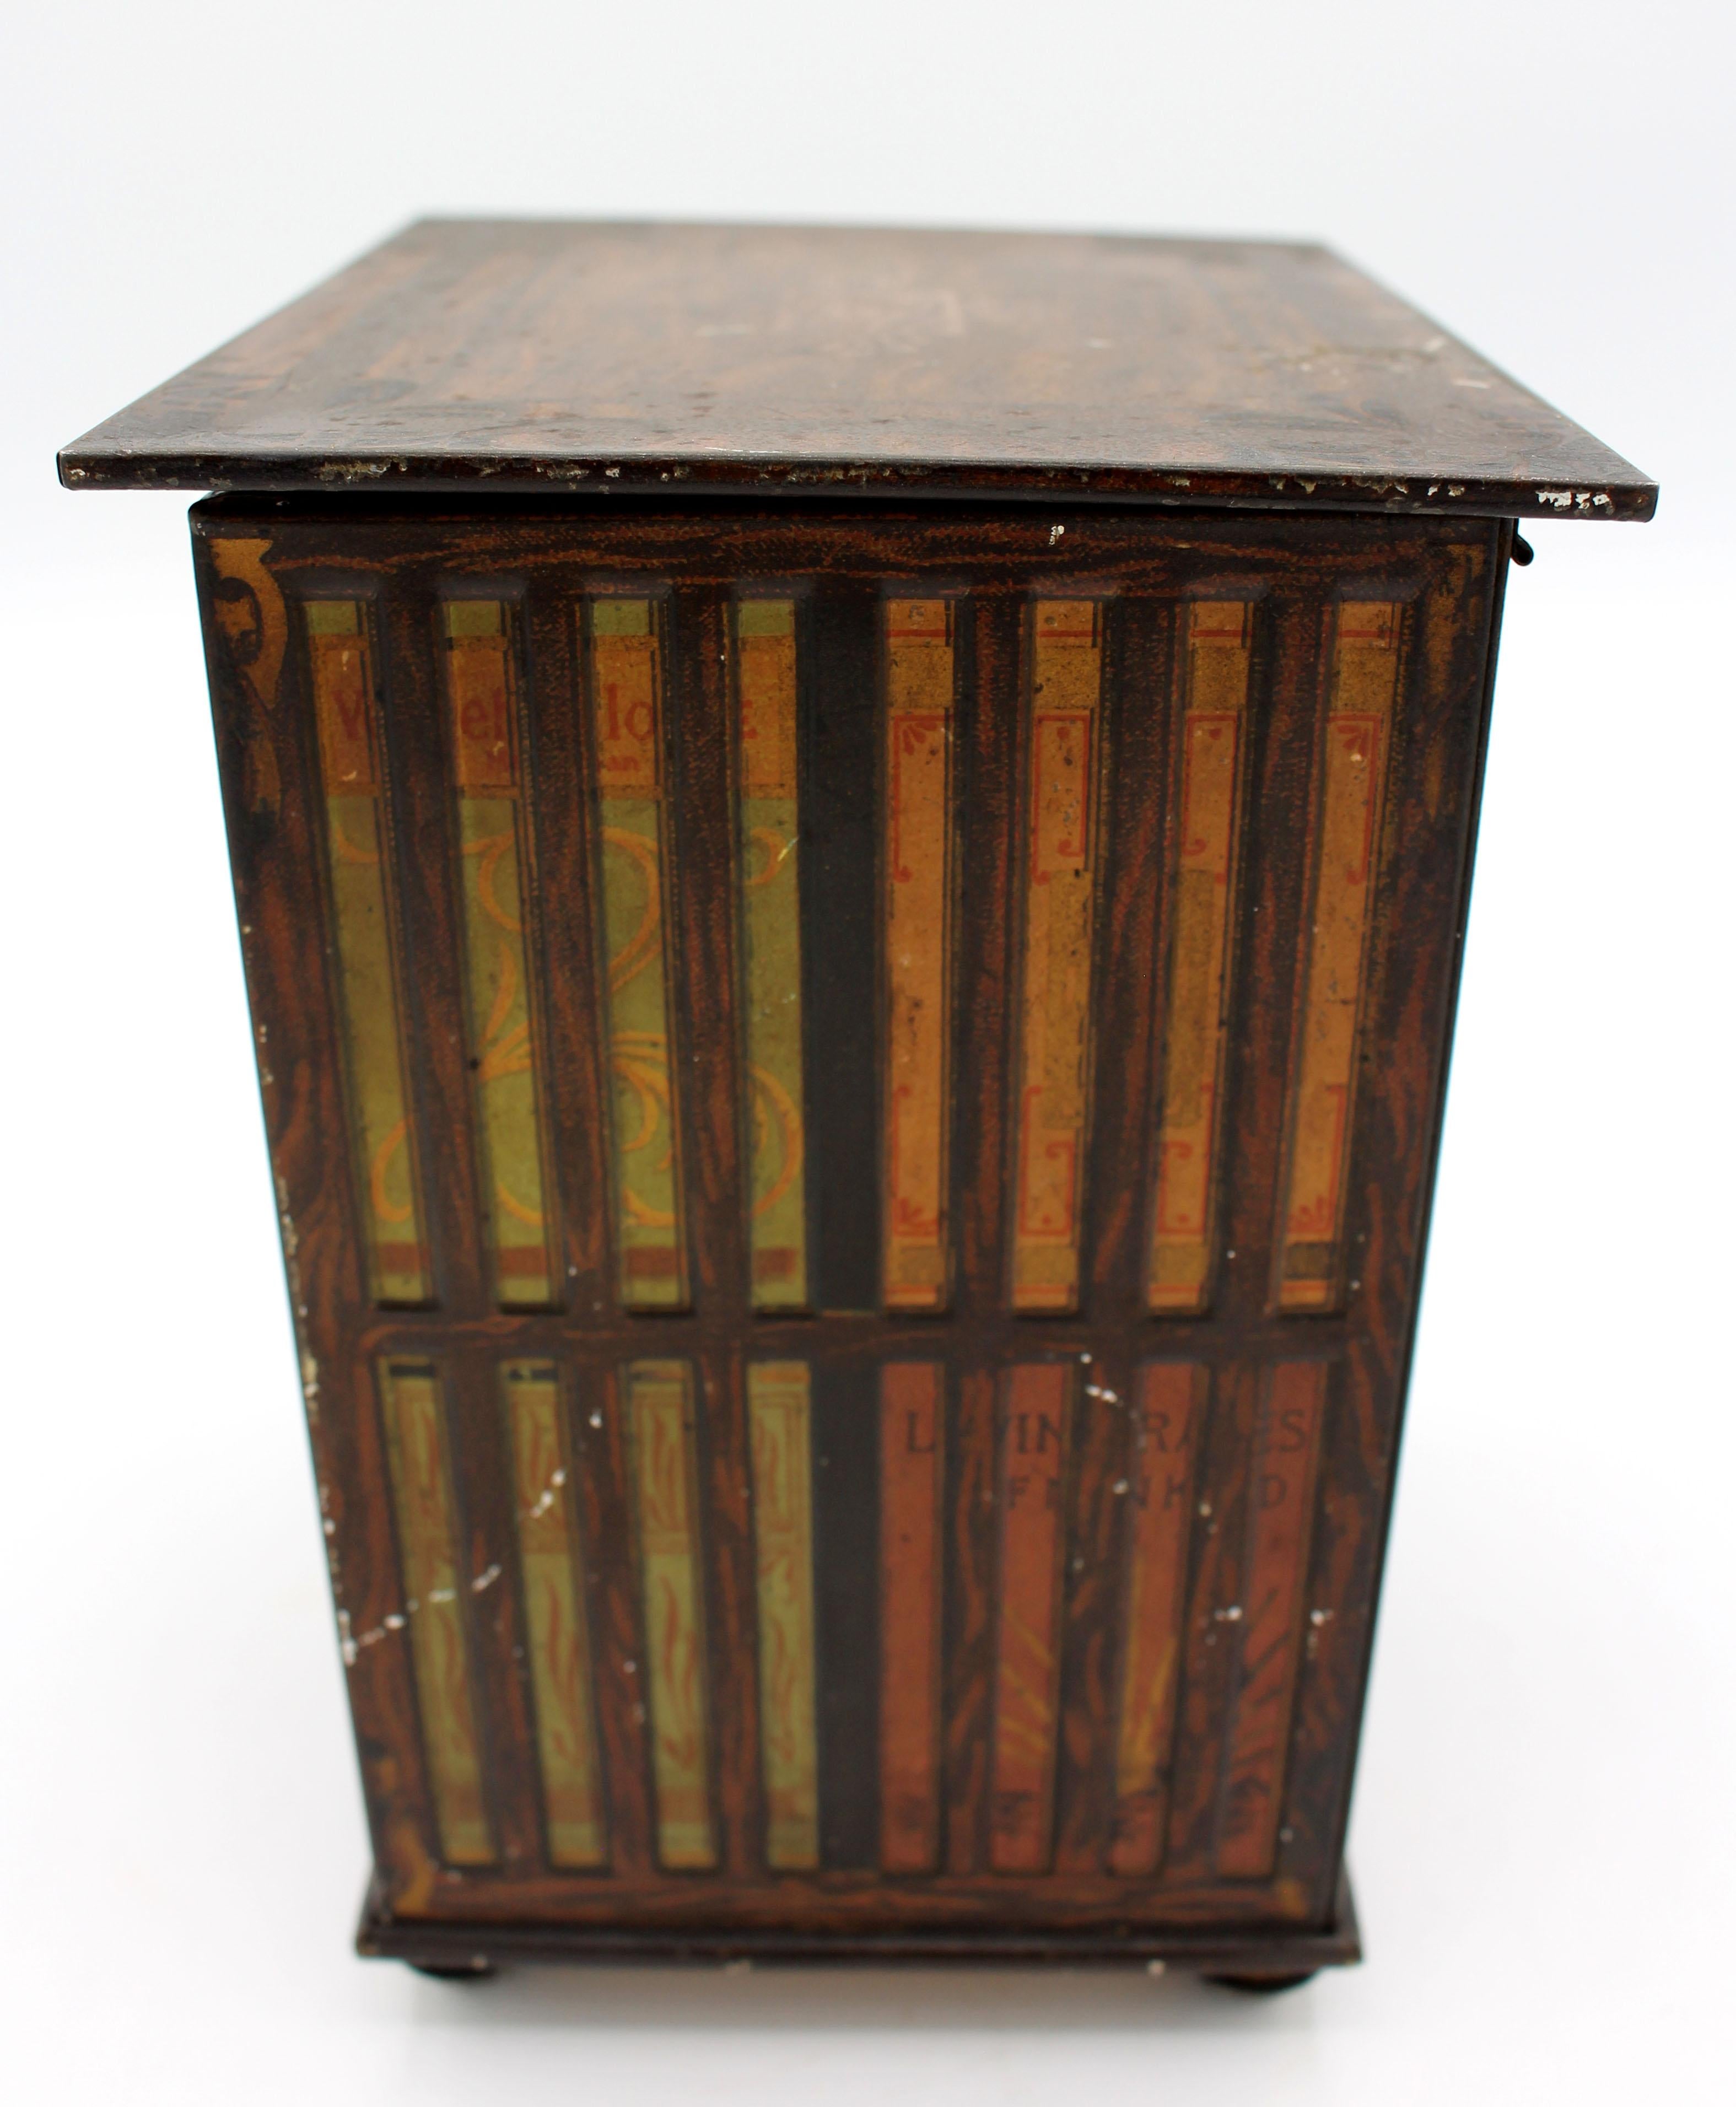 Edwardian Faux Revolving Bookcase Biscuit Tin Box by Huntley & Palmers, 1905, English For Sale